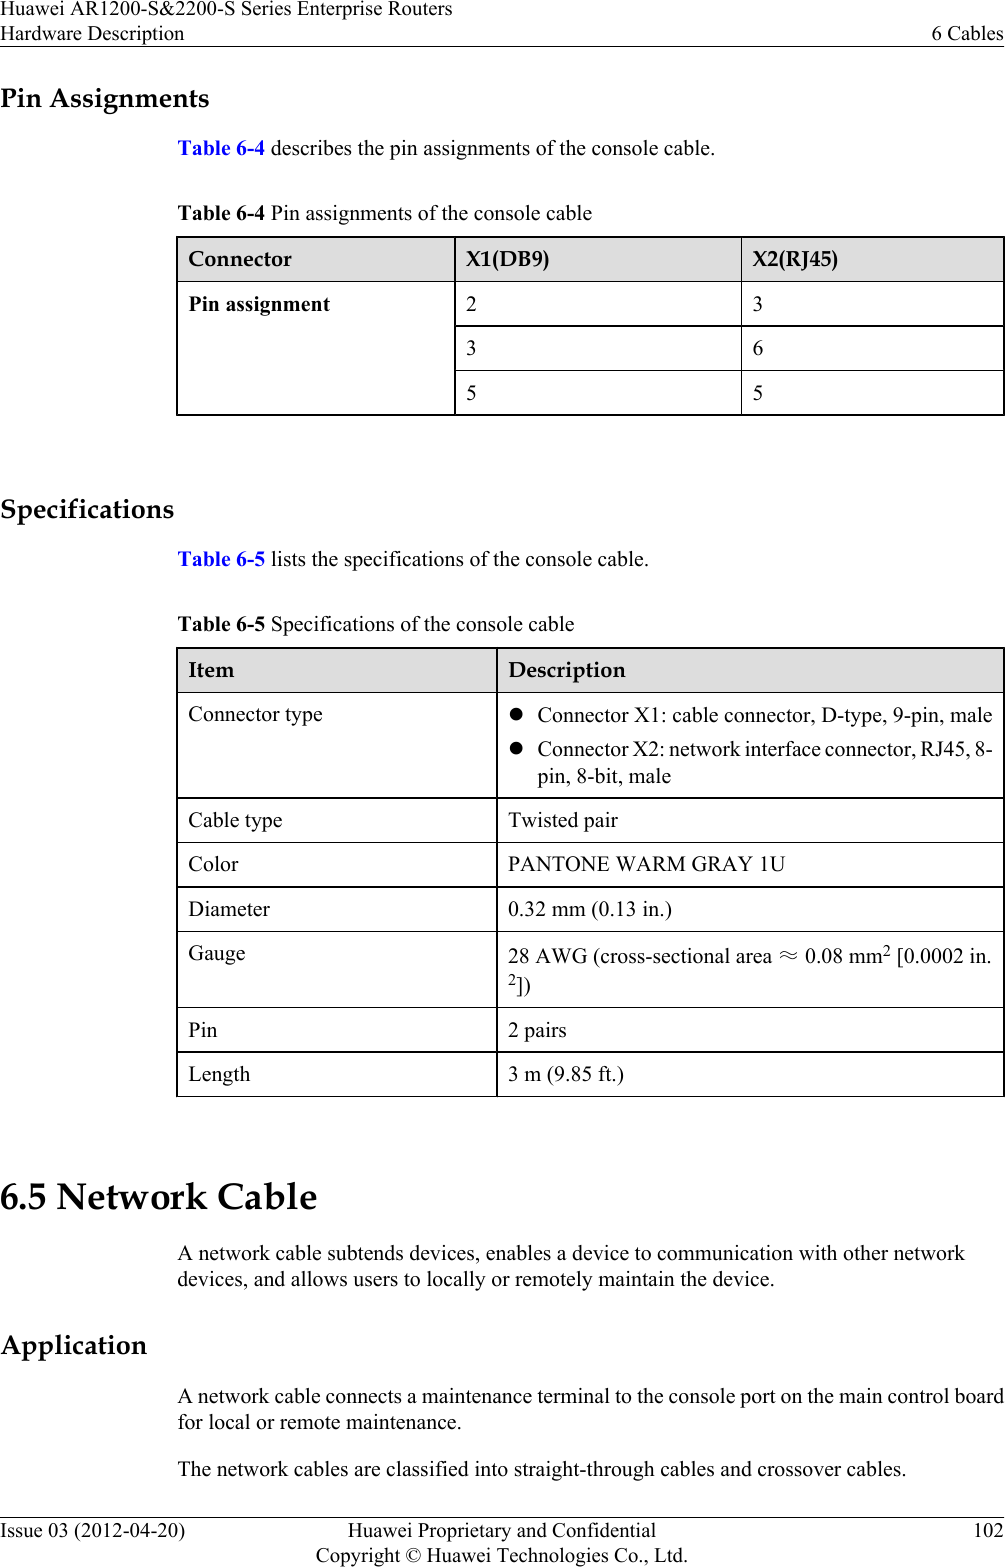 Pin AssignmentsTable 6-4 describes the pin assignments of the console cable.Table 6-4 Pin assignments of the console cableConnector X1(DB9) X2(RJ45)Pin assignment 2 33 65 5 SpecificationsTable 6-5 lists the specifications of the console cable.Table 6-5 Specifications of the console cableItem DescriptionConnector type lConnector X1: cable connector, D-type, 9-pin, malelConnector X2: network interface connector, RJ45, 8-pin, 8-bit, maleCable type Twisted pairColor PANTONE WARM GRAY 1UDiameter 0.32 mm (0.13 in.)Gauge 28 AWG (cross-sectional area ≈ 0.08 mm2 [0.0002 in.2])Pin 2 pairsLength 3 m (9.85 ft.) 6.5 Network CableA network cable subtends devices, enables a device to communication with other networkdevices, and allows users to locally or remotely maintain the device.ApplicationA network cable connects a maintenance terminal to the console port on the main control boardfor local or remote maintenance.The network cables are classified into straight-through cables and crossover cables.Huawei AR1200-S&amp;2200-S Series Enterprise RoutersHardware Description 6 CablesIssue 03 (2012-04-20) Huawei Proprietary and ConfidentialCopyright © Huawei Technologies Co., Ltd.102